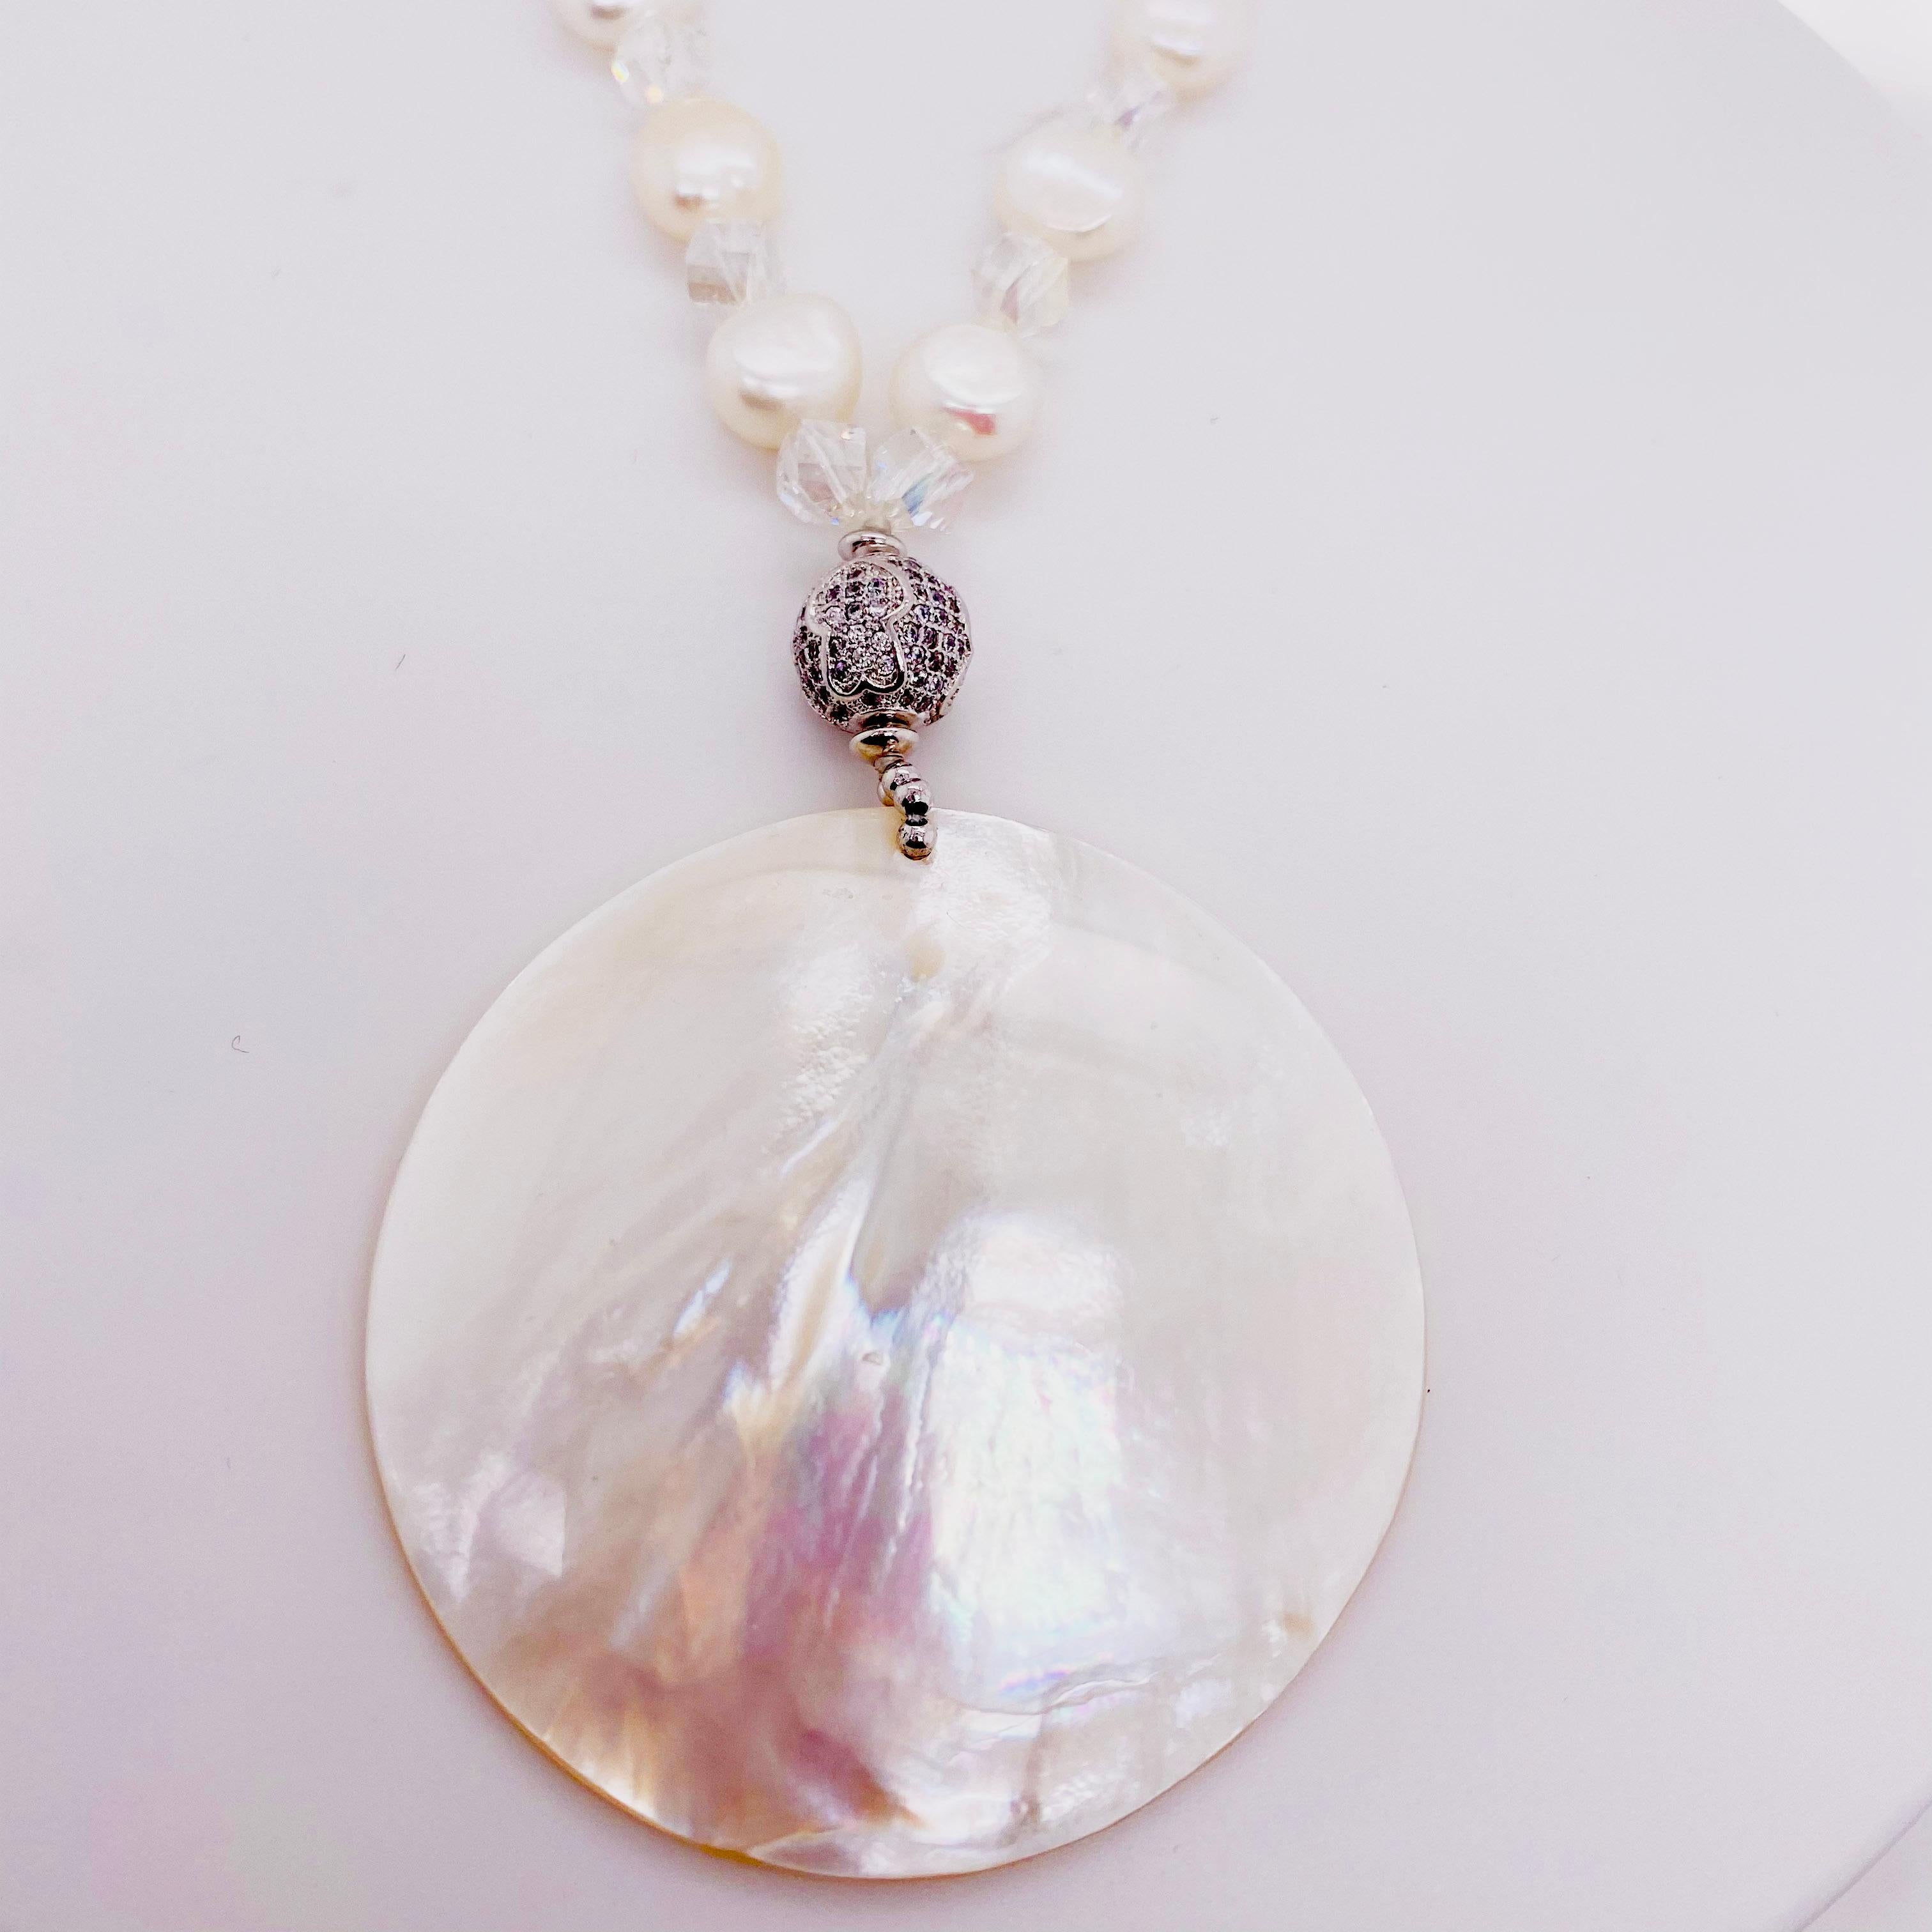 The necklace makes a gorgeous statement! The beautiful white pearls are paired with mother-of-pearl, and sterling silver beads. At thirty-three inches the necklace hangs so nicely and hits just perfectly! The details for this beautiful necklace are